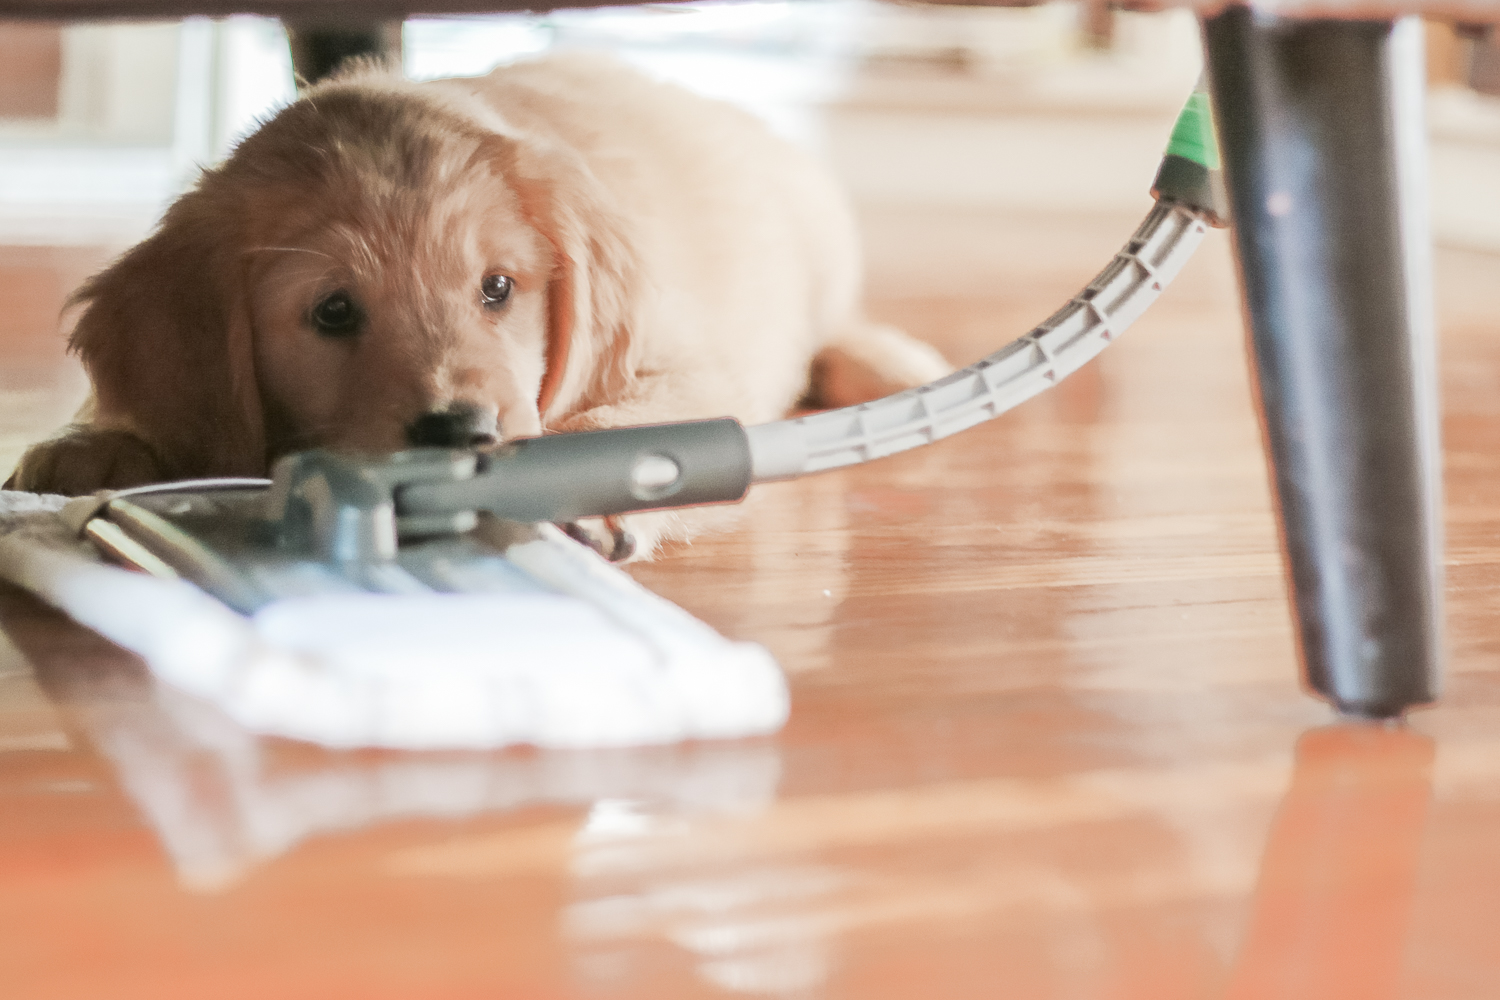 best way to clean hardwood floors with pets, best mop for dog hair on hardwood, STAINMASTER Sweep and Mop Kit review, Cleaning Hacks for Dog Moms: How to Tidy Your Home in 15 Minutes (or Less) by southern lifestyle blogger Stephanie Ziajka from Diary of a Debutante